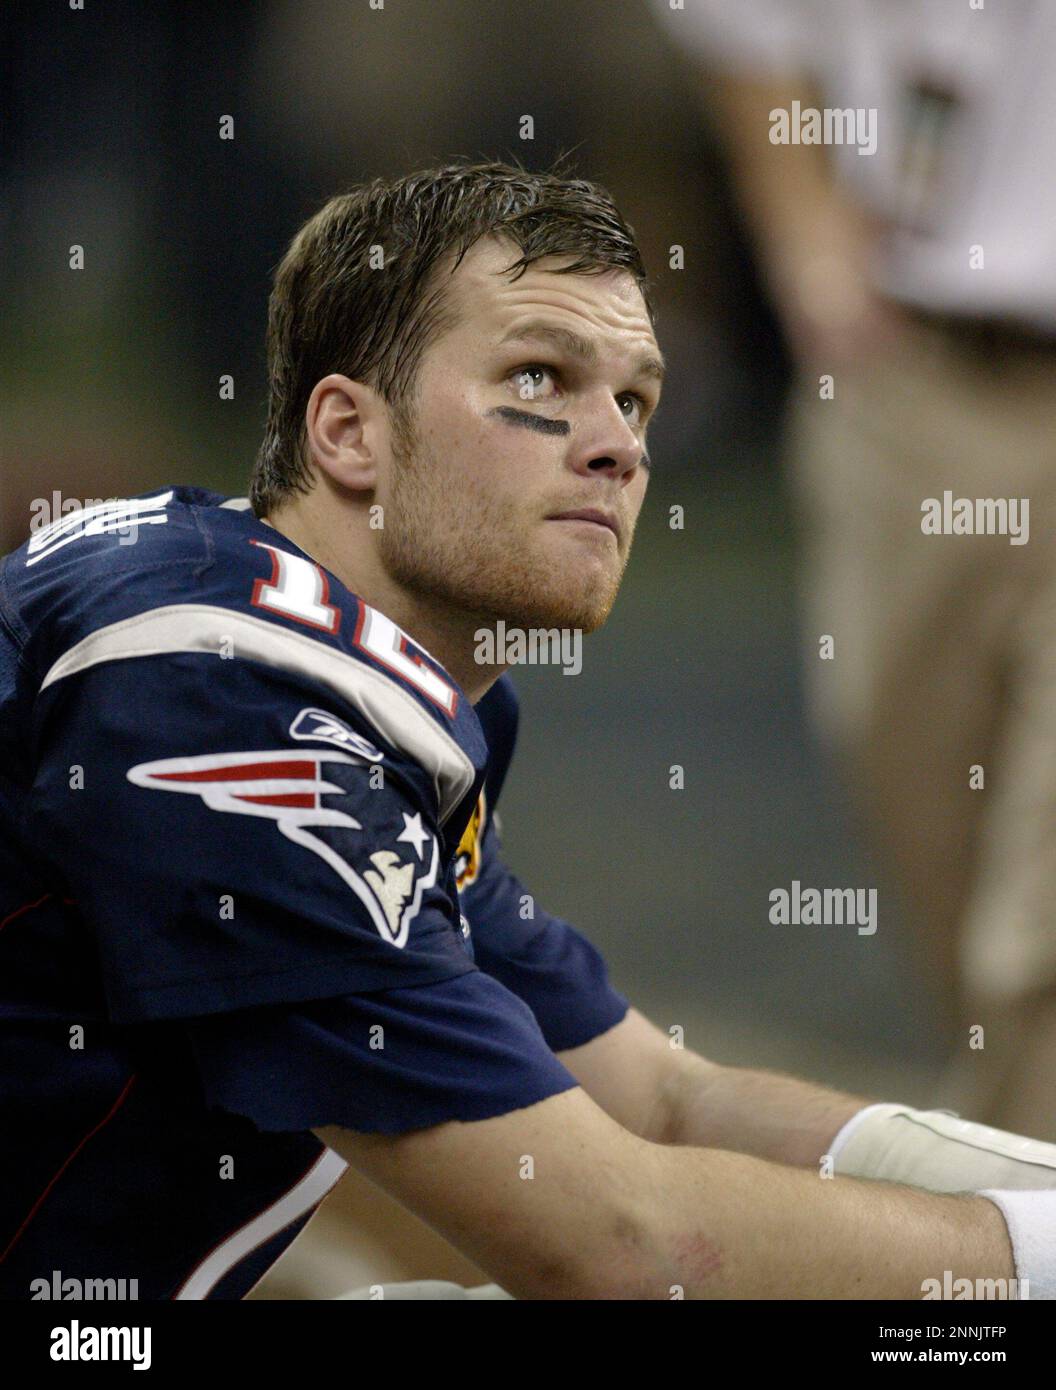 01 Feb 2004: Tom Brady of the New England Patriots holds up the